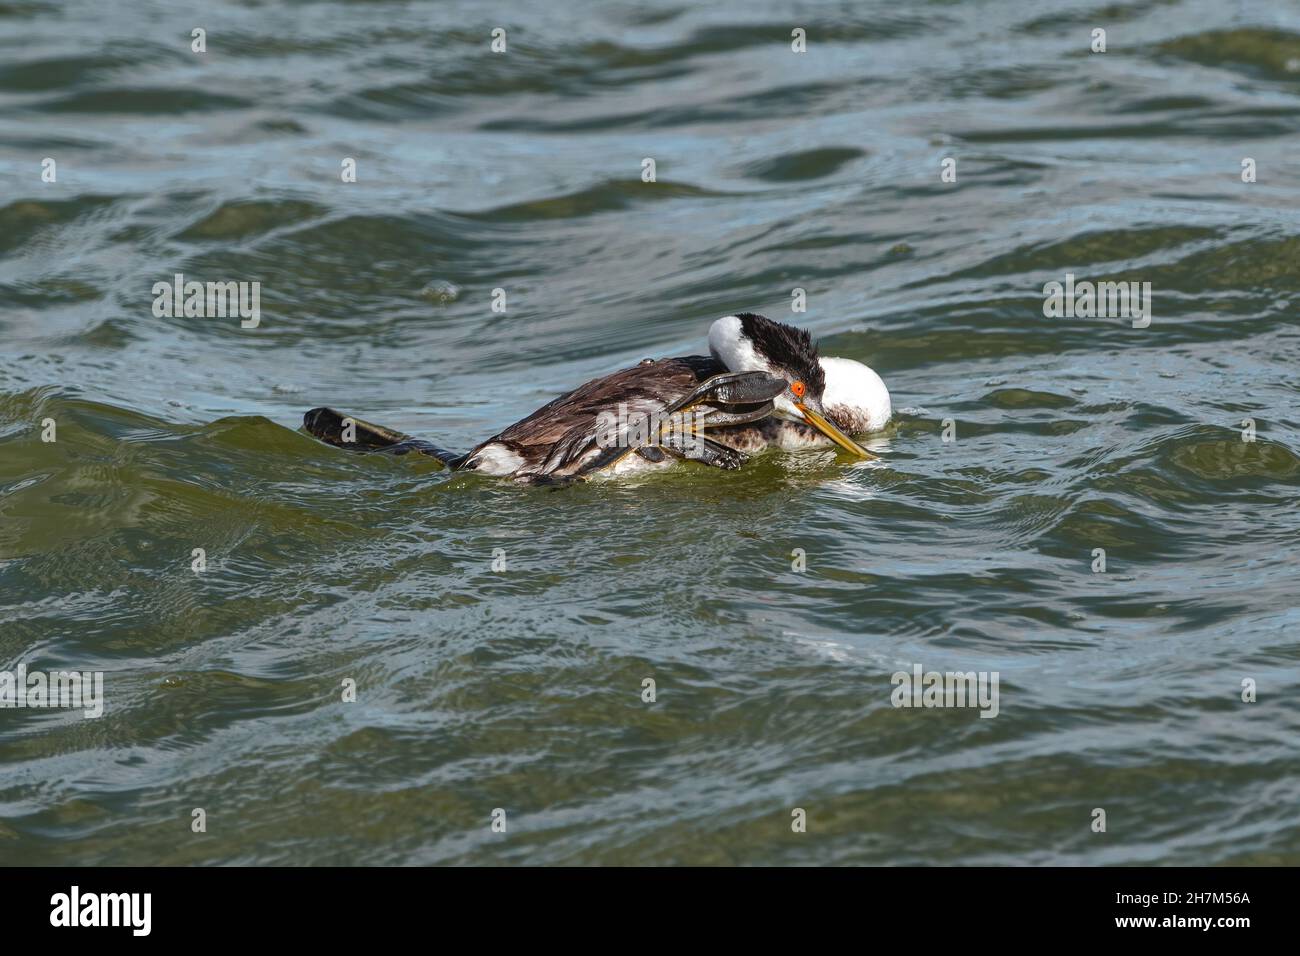 A funny image of a Western Grebe taking a moment to scratch an itch while floating in a deep lake. Stock Photo